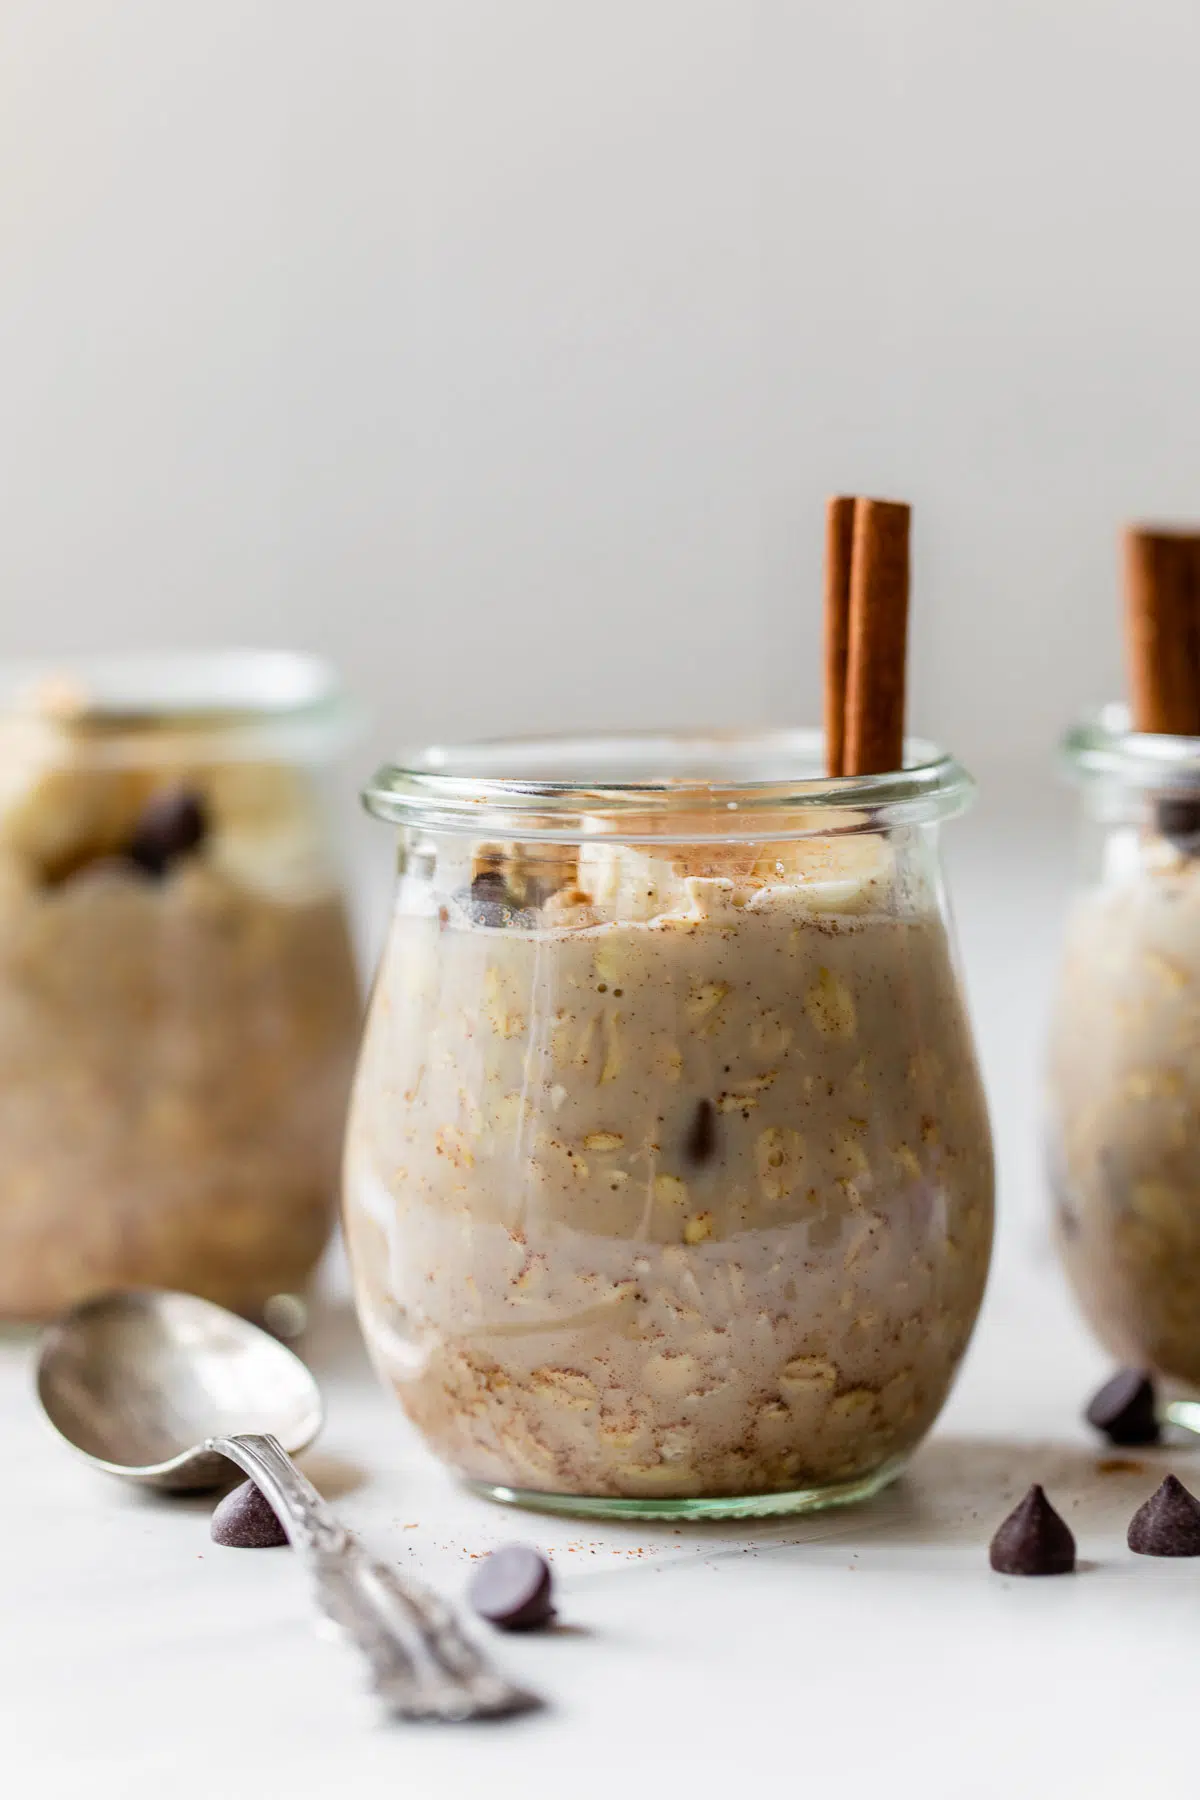 overnight oats in a jar with chocolate chips and a cinnamon stick